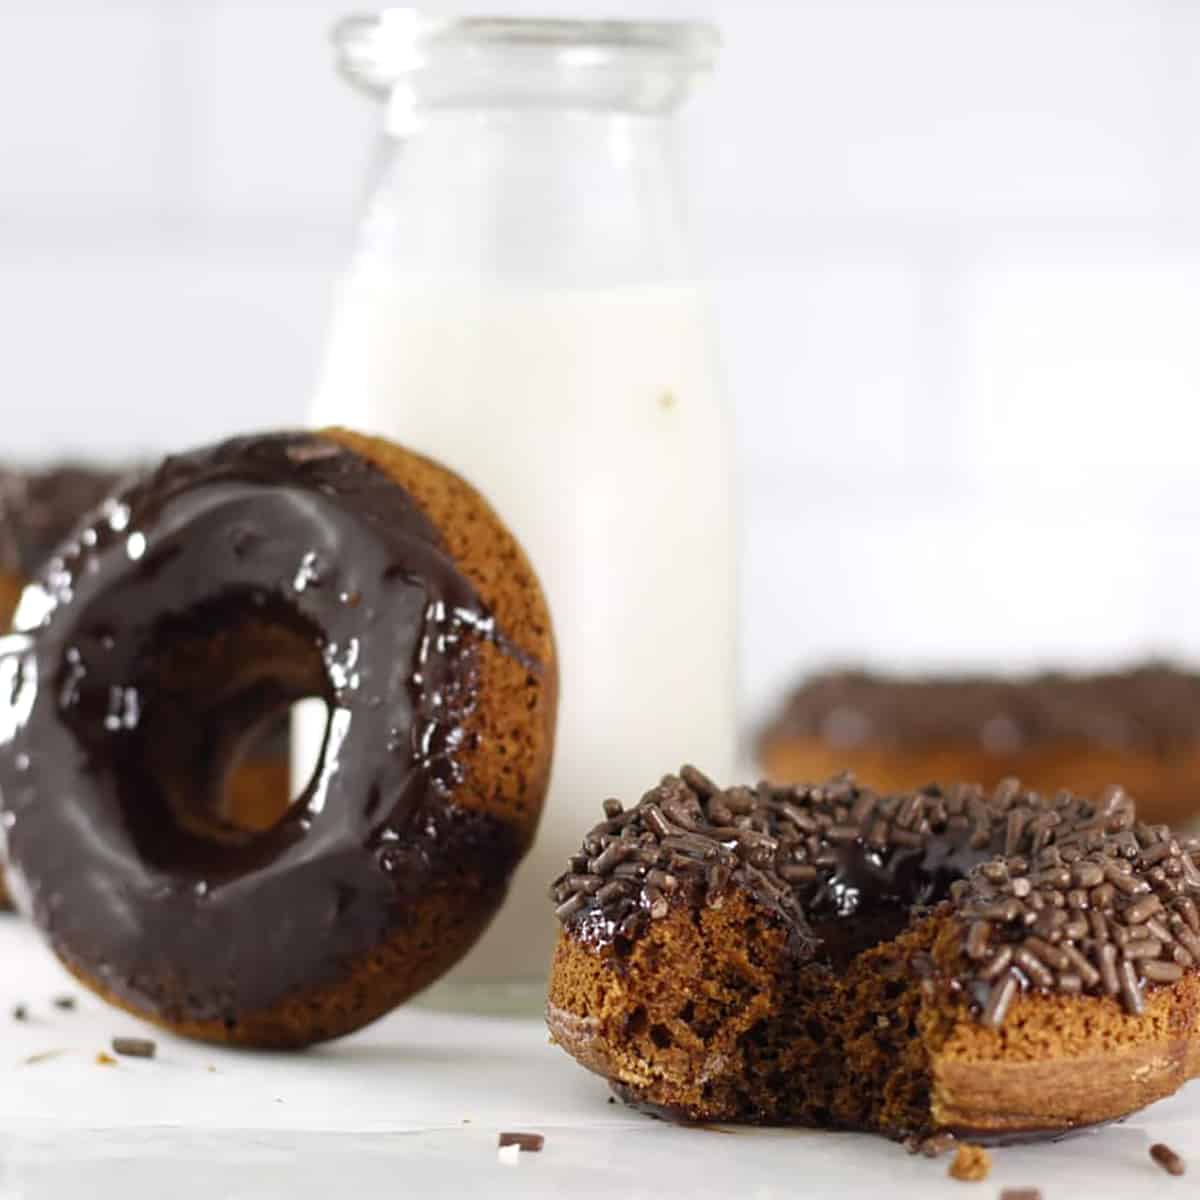 a chocolate frosted donut leaning on a milk bottle and another with a bite